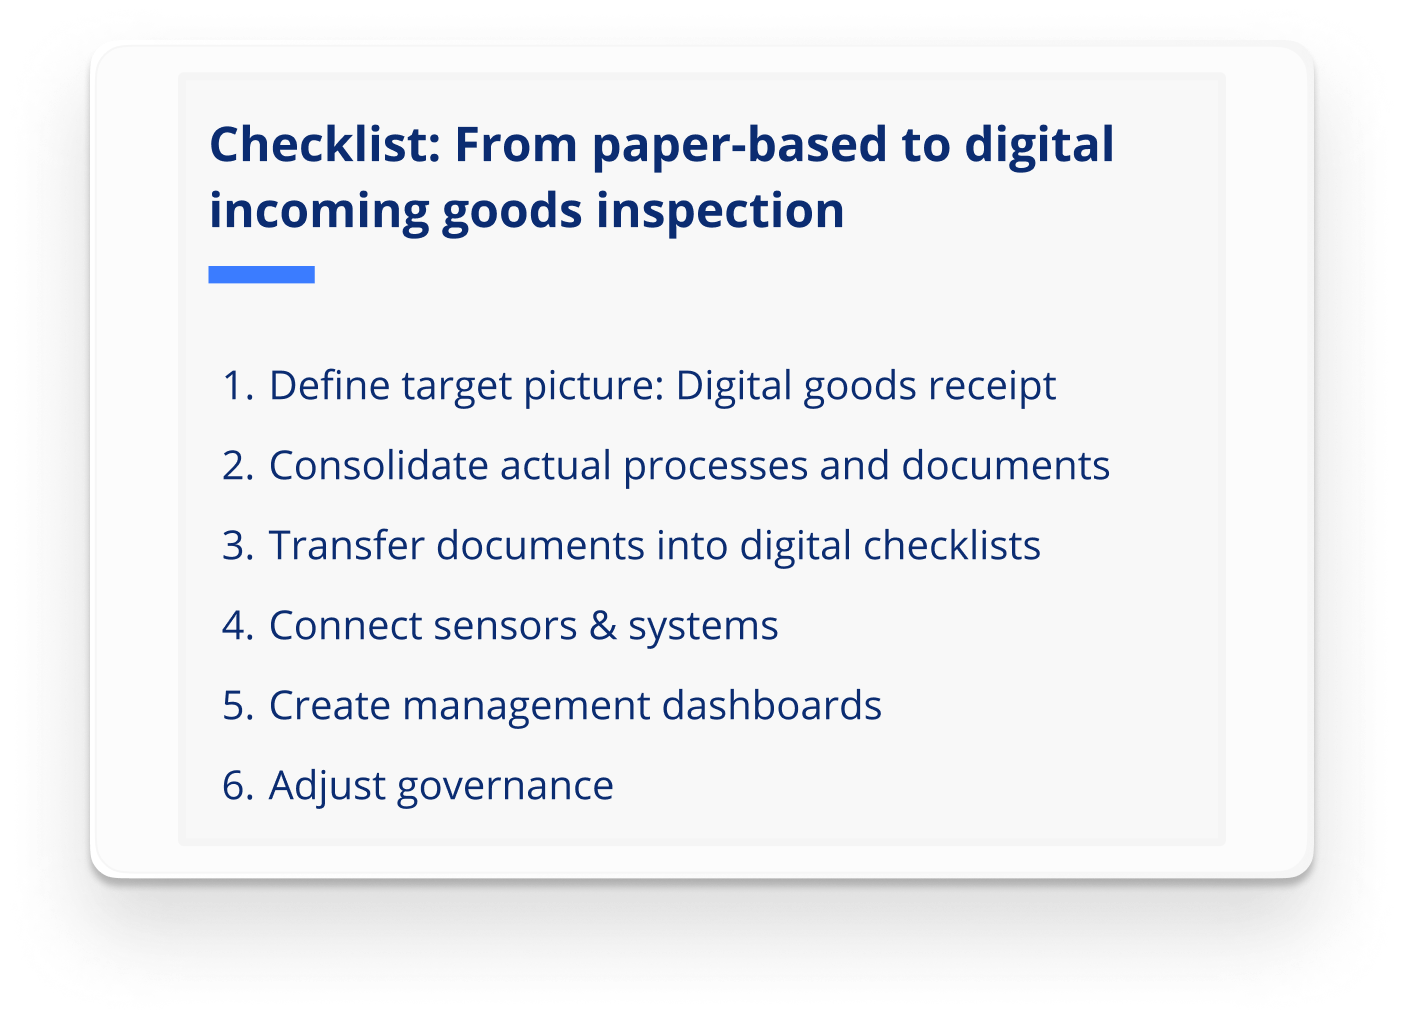 Checklist-from-paper-based-to-digital-incoming-goods-inspection